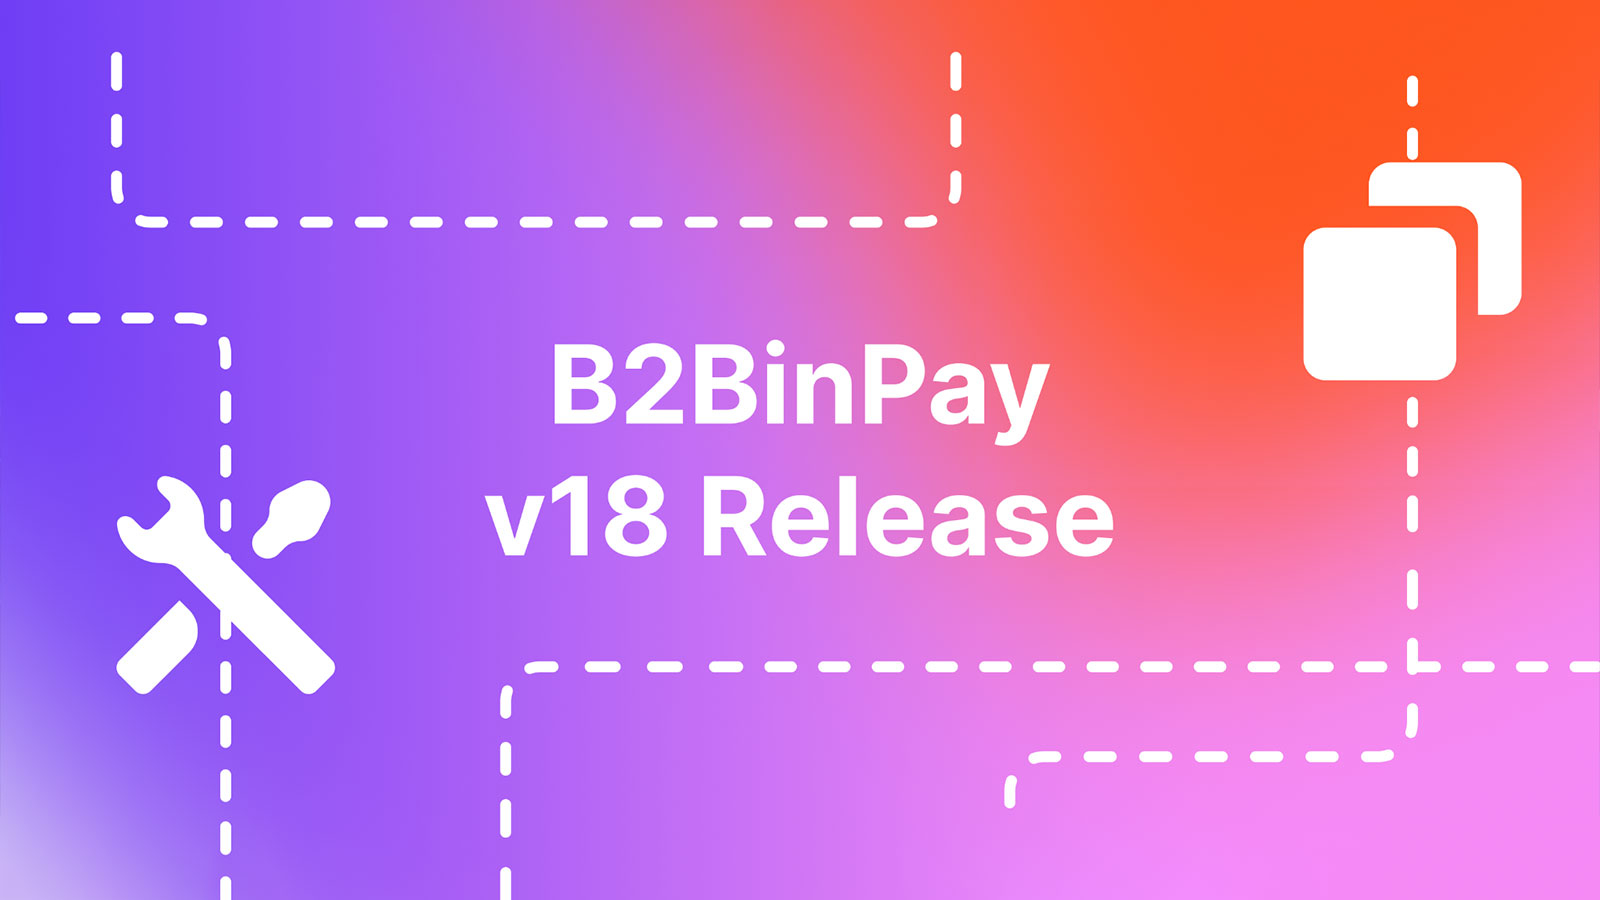 B2BinPay v18 Provides Unified Access Based on Account Merge Feature